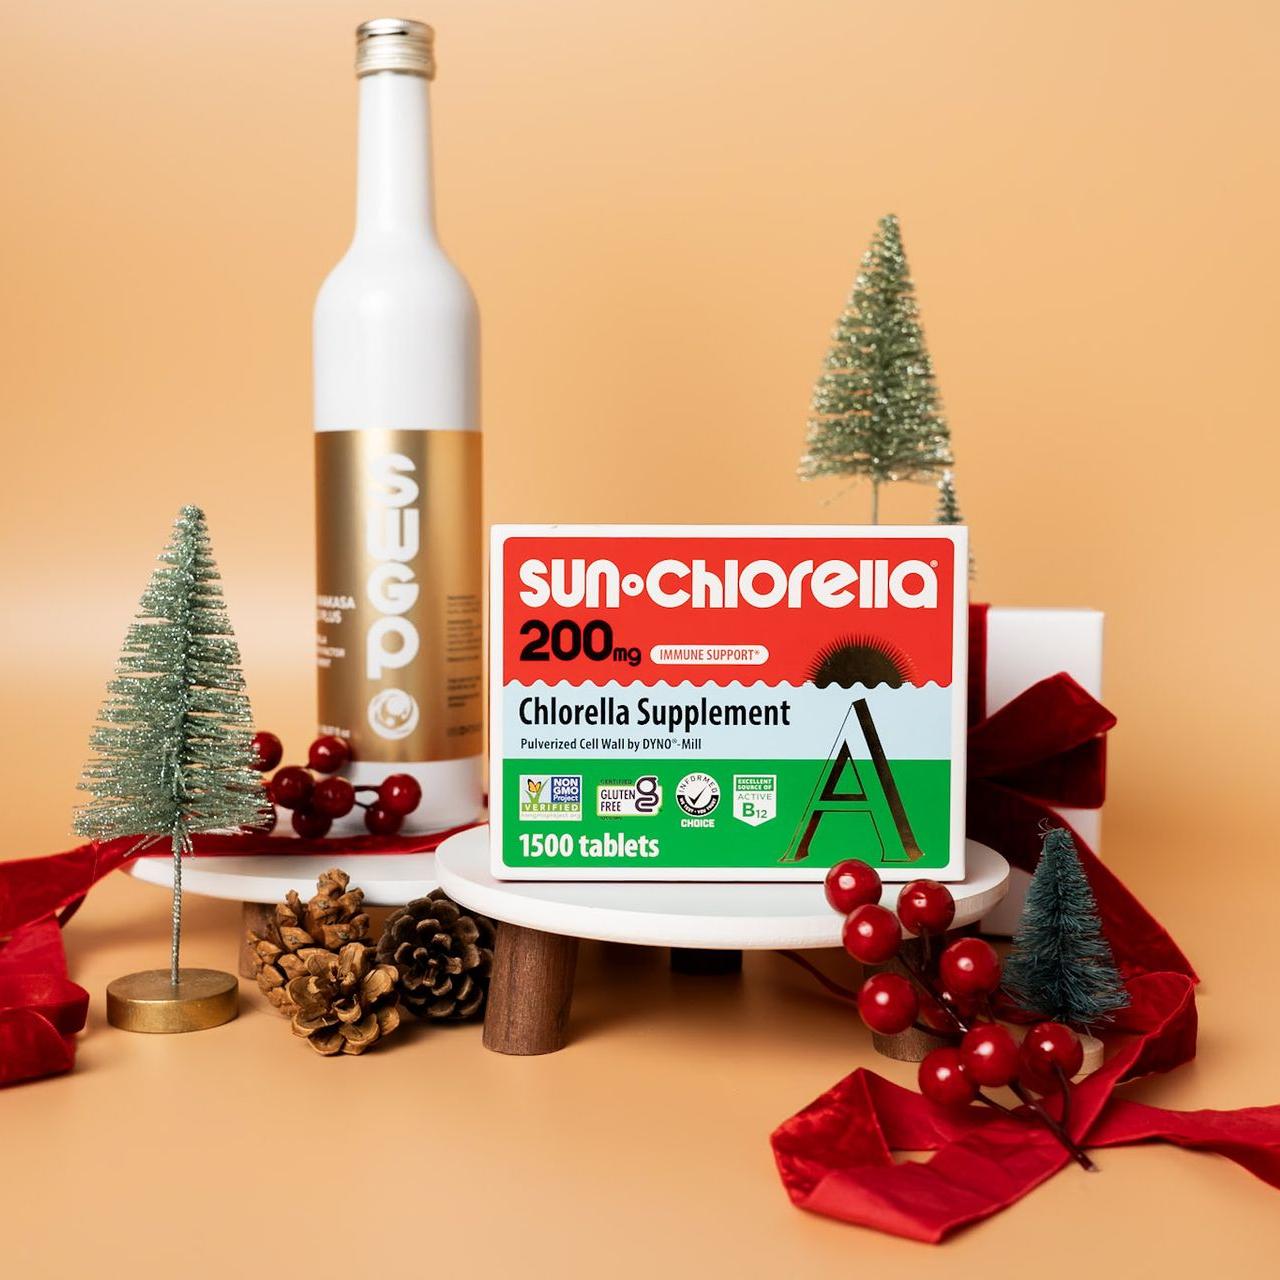 Immune Booster Holiday Deals: 1,500 Sun Chlorella 200mg Tablets Family Size Box and Sun Wakasa Gold Plus Chlorella Growth Factor Extract Bottle Bundle